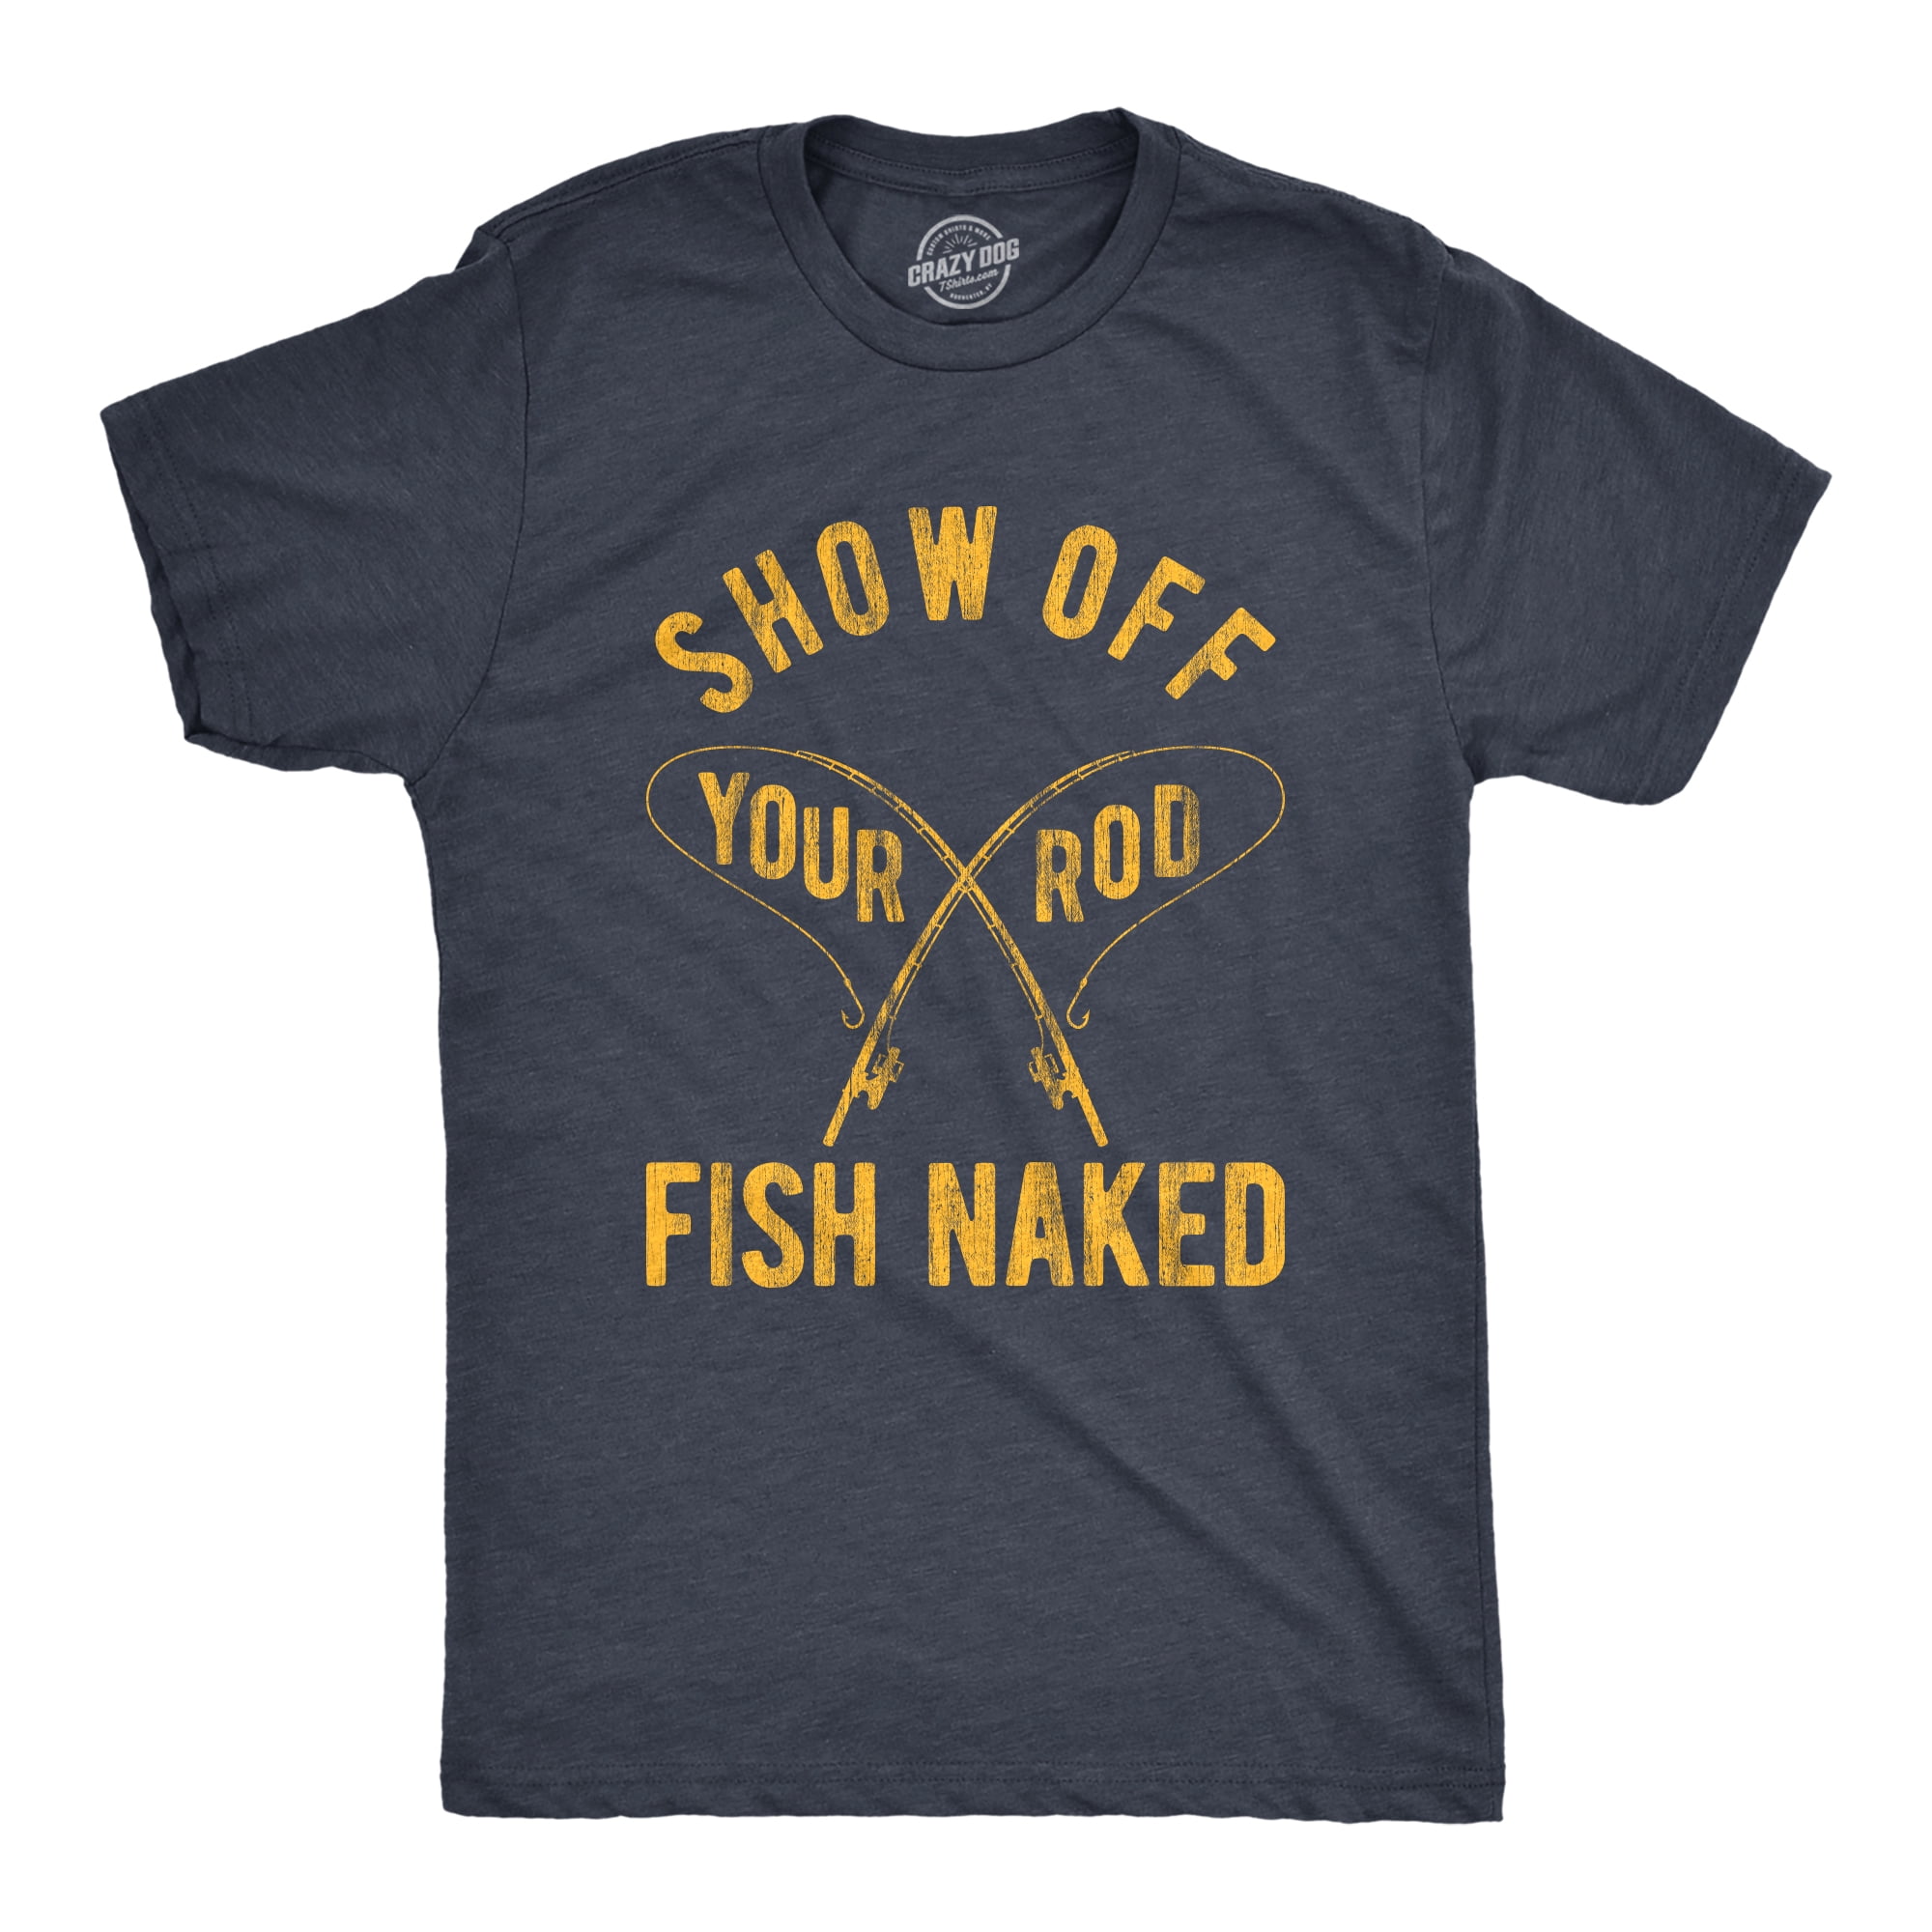 My rod and reel, they comfort me | Essential T-Shirt